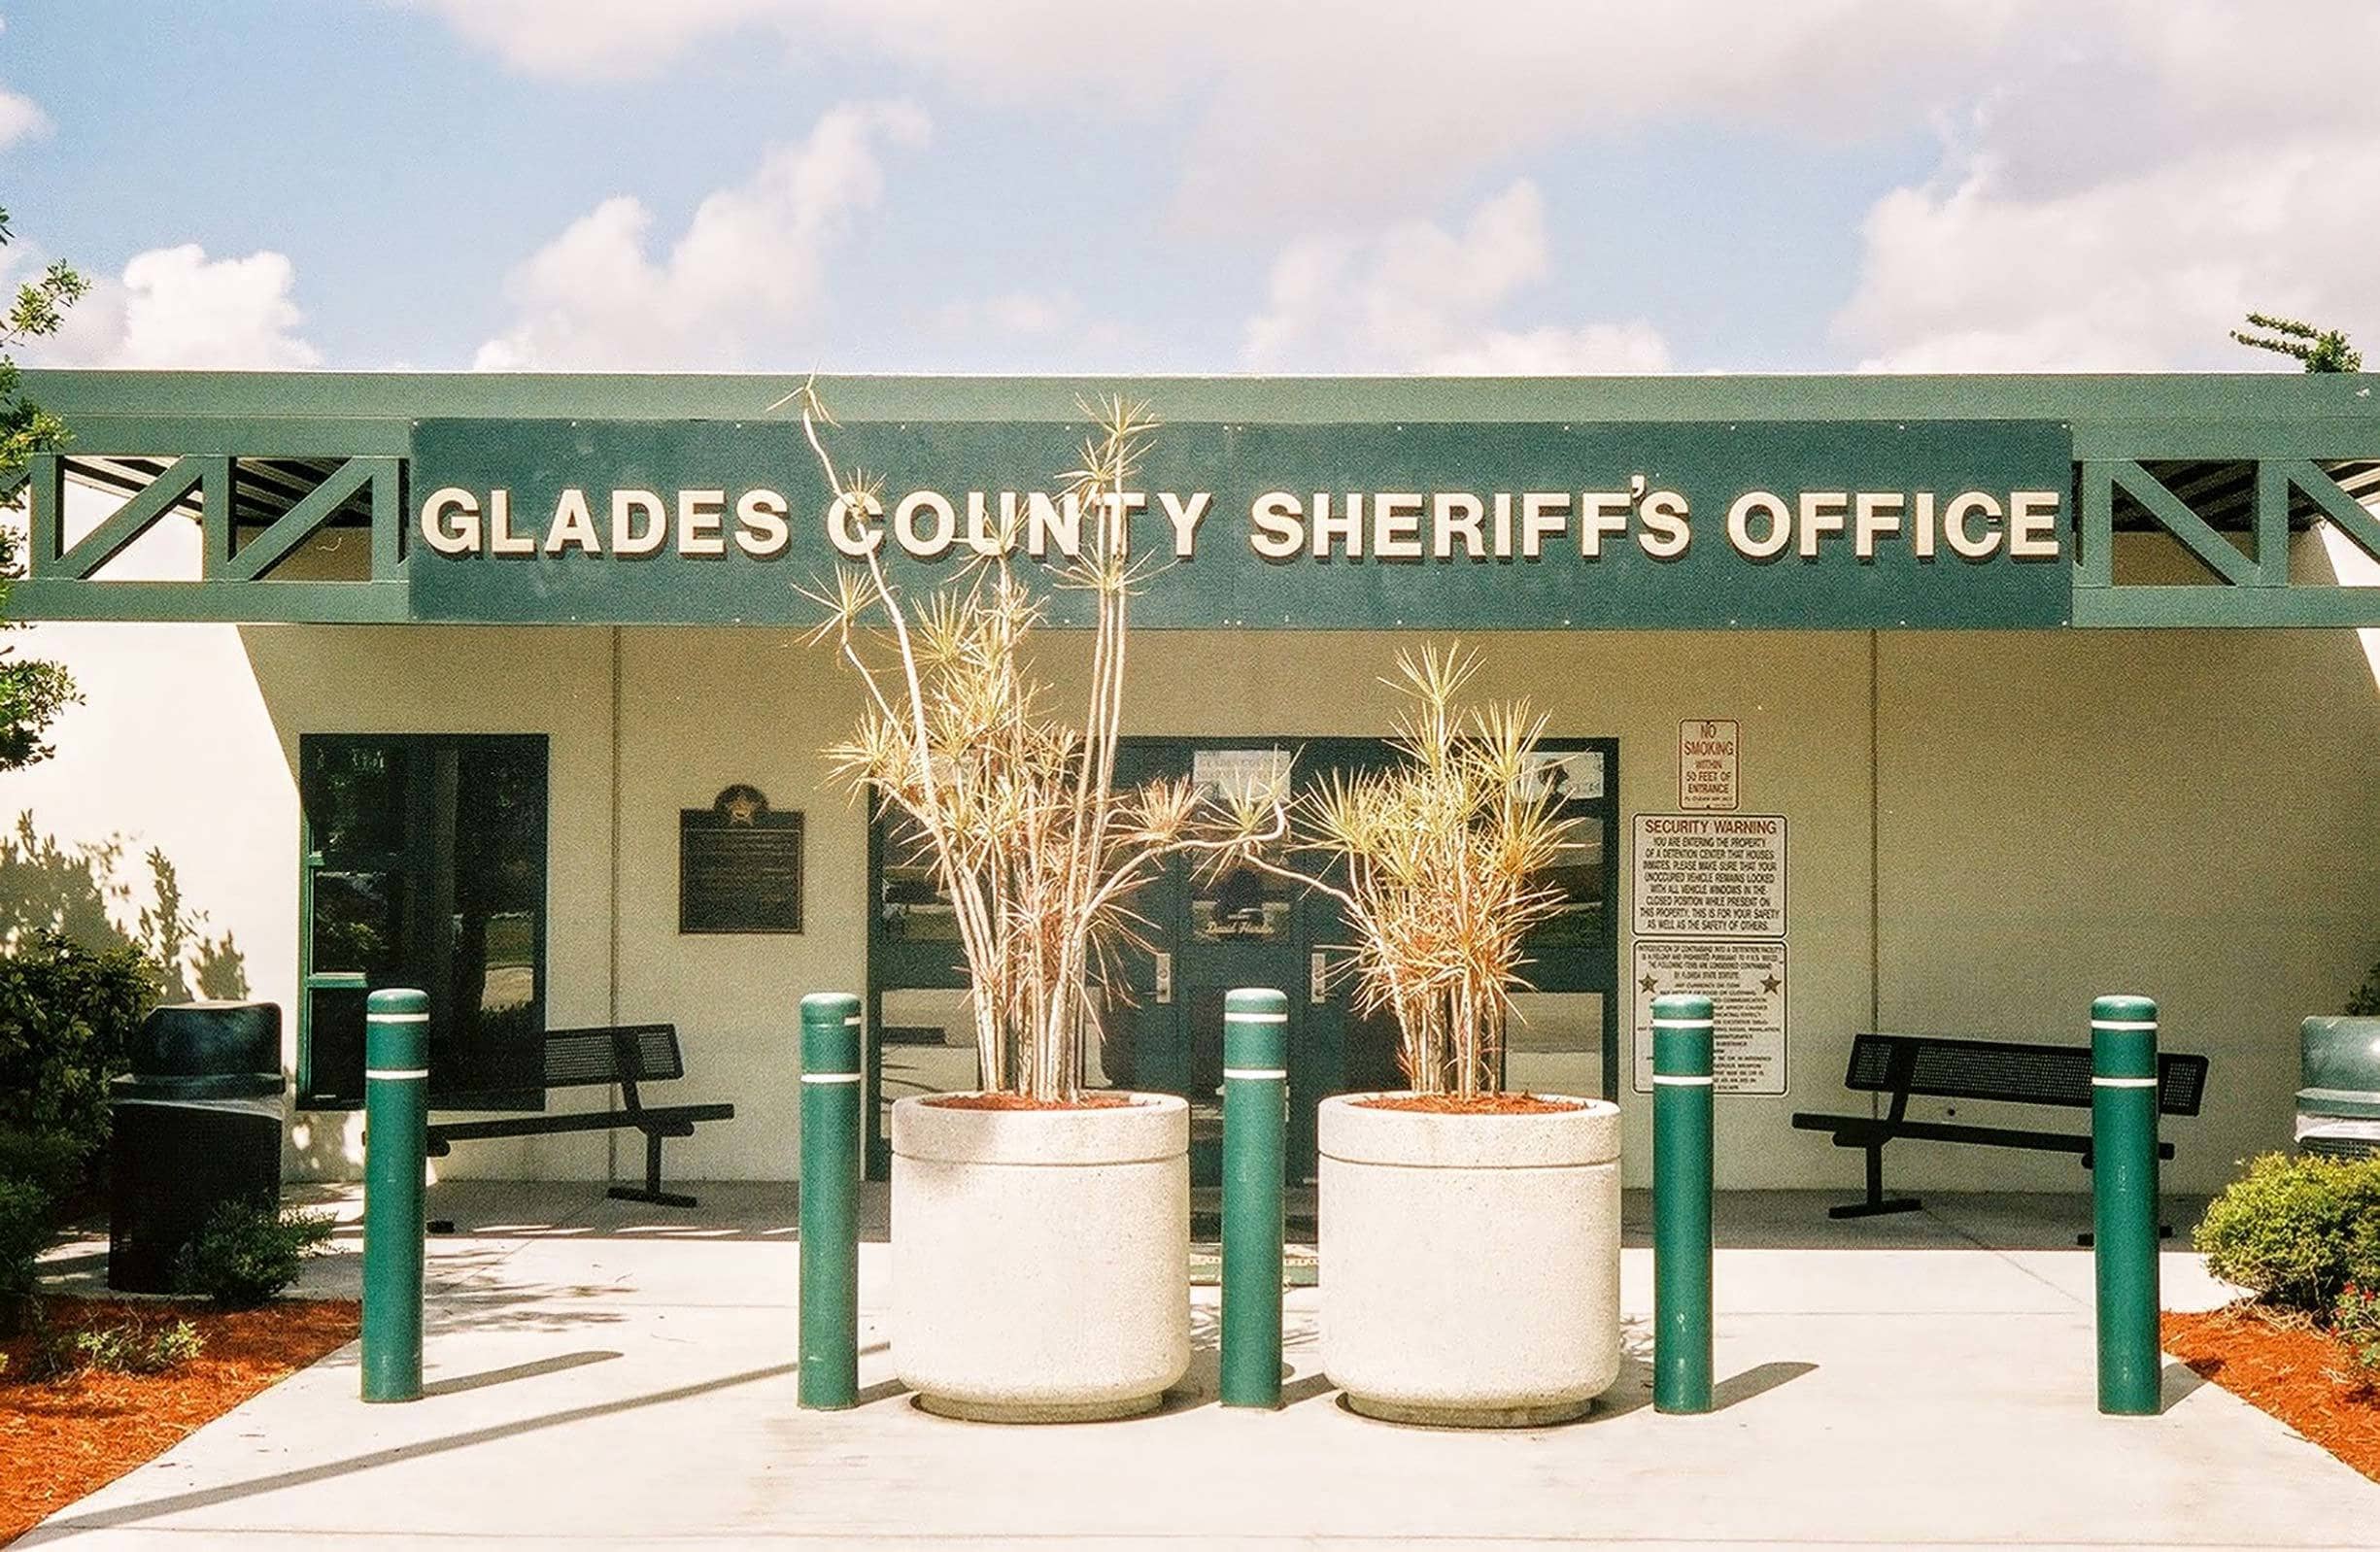 Image of Glades County Sheriff's Office